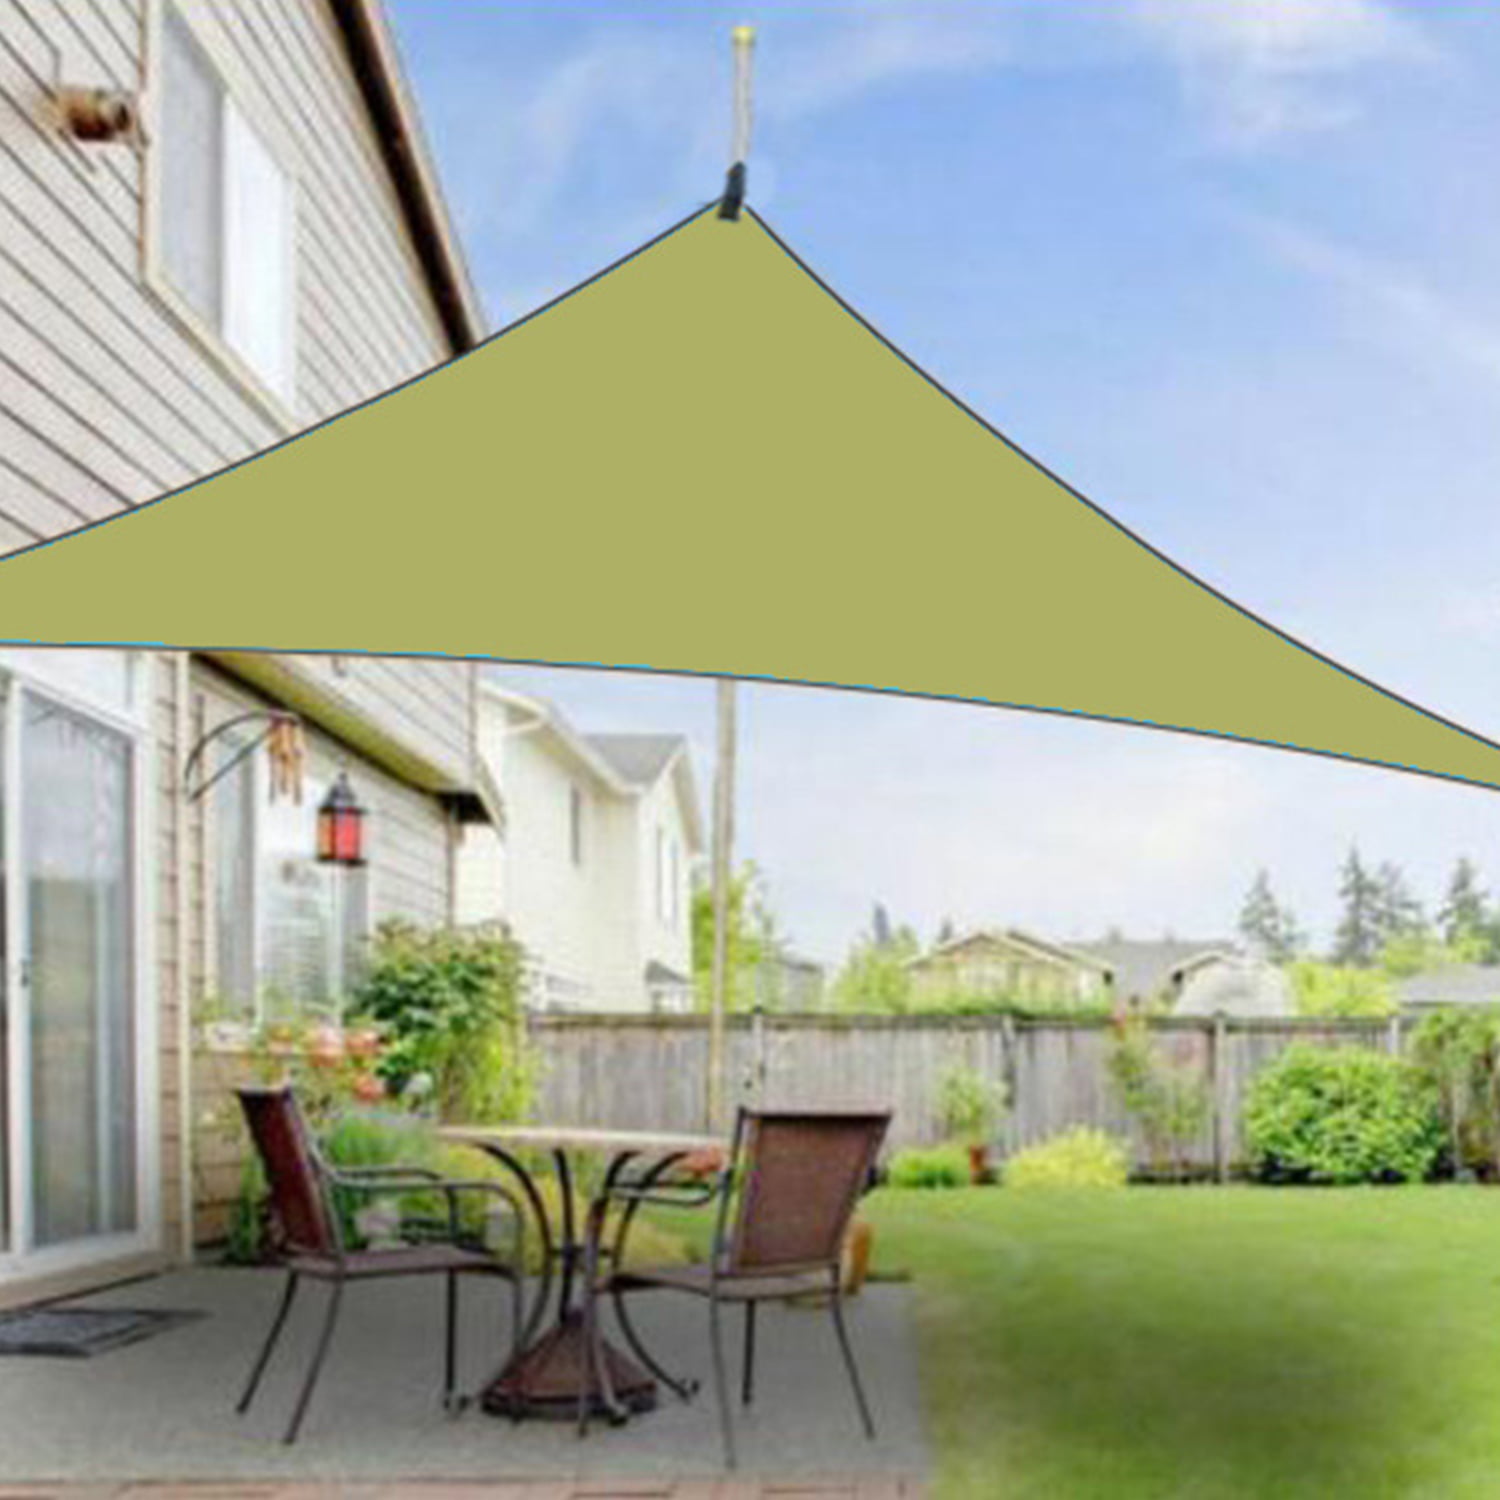 Details about   Outdoor Garden Patio Sun Shade Sail Canopy Awning Waterproof UV Protected Block 